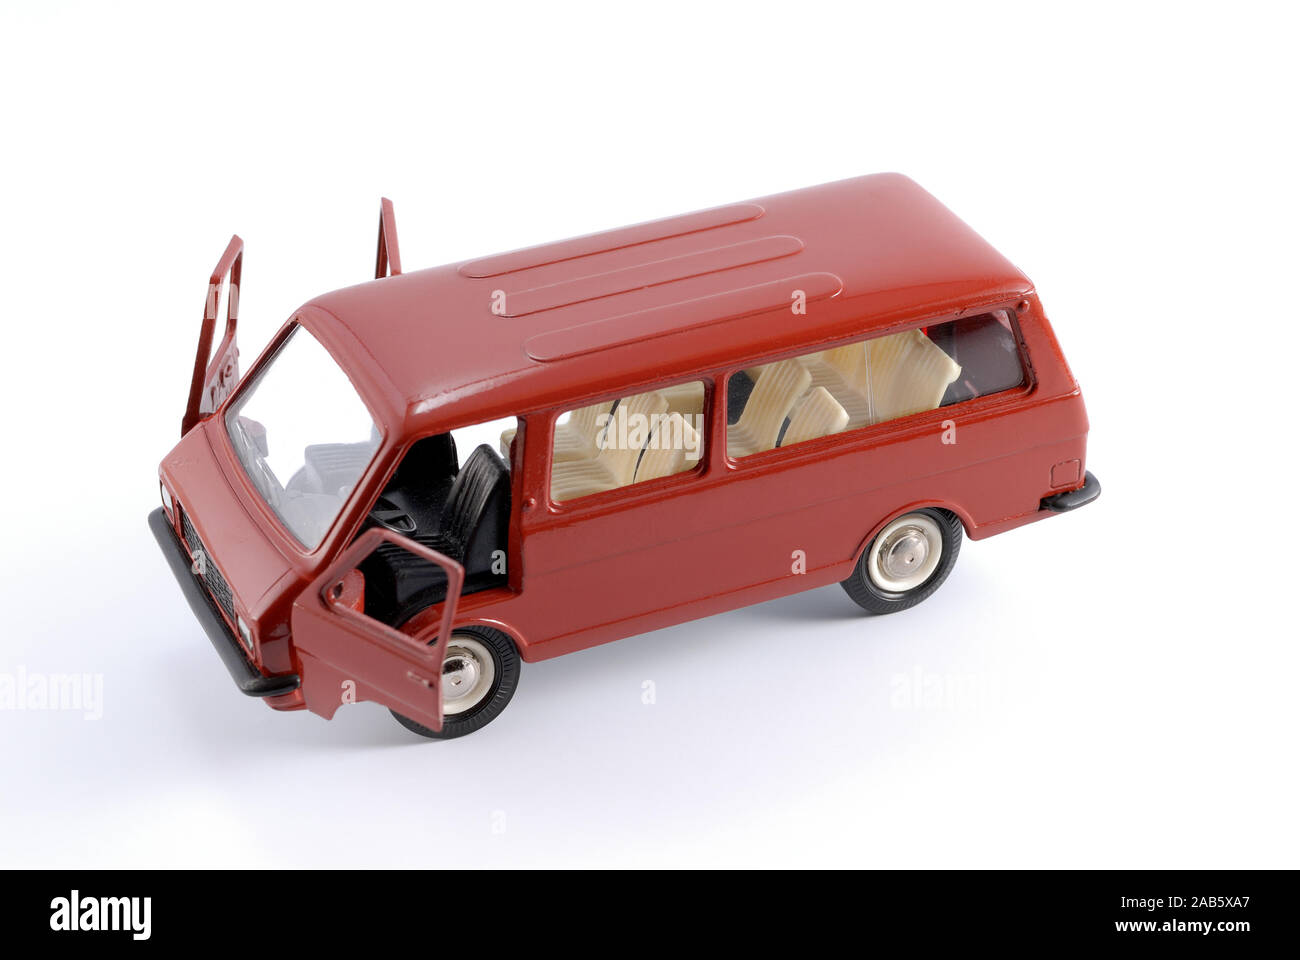 Reduced copy of a red passenger retro minibus car on a white background made of metal Stock Photo